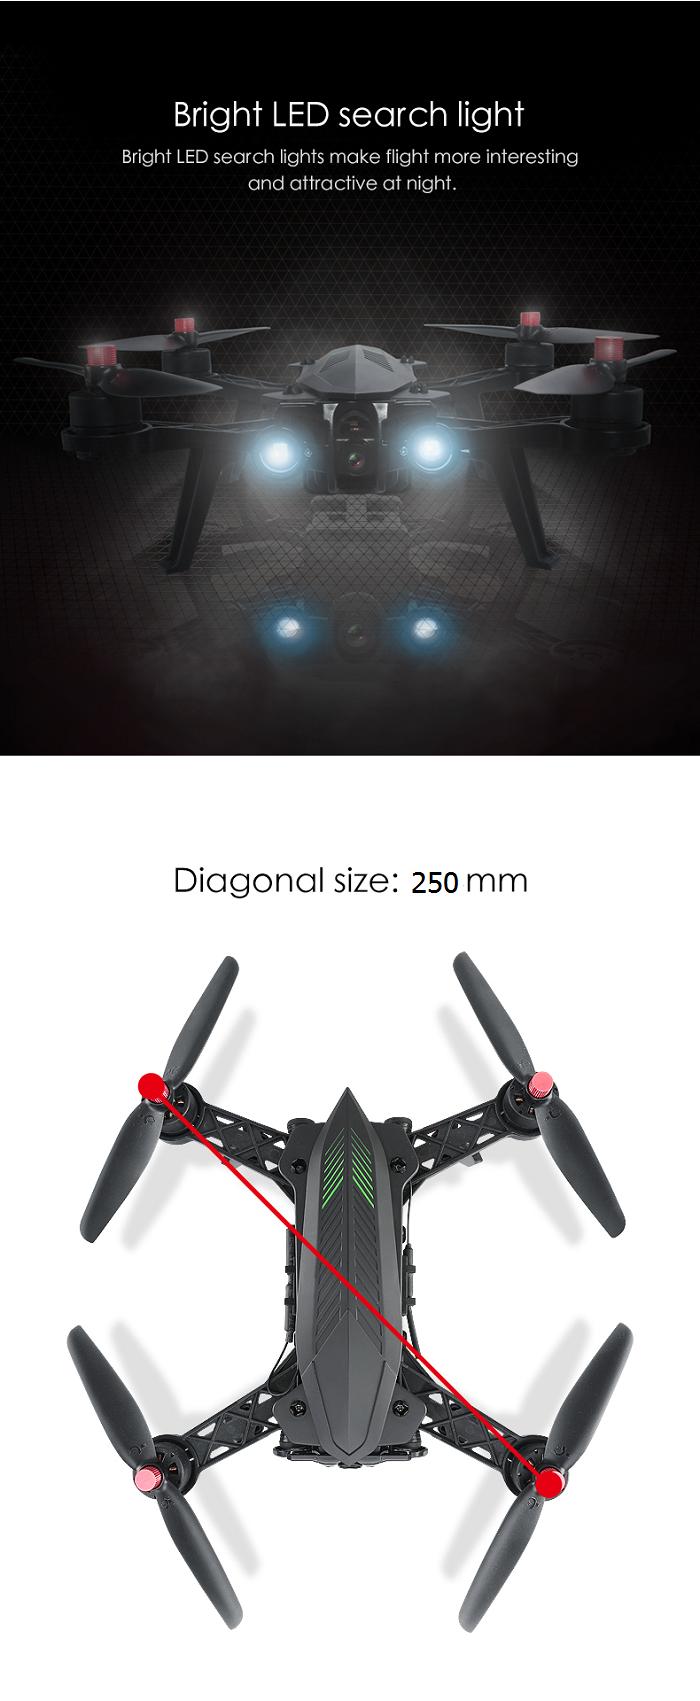 MJX-B6-Bugs-6-Brushless-with-LED-Light-3D-Roll-Racing-Drone-RC-Quadcopter-RTF-1148467-7